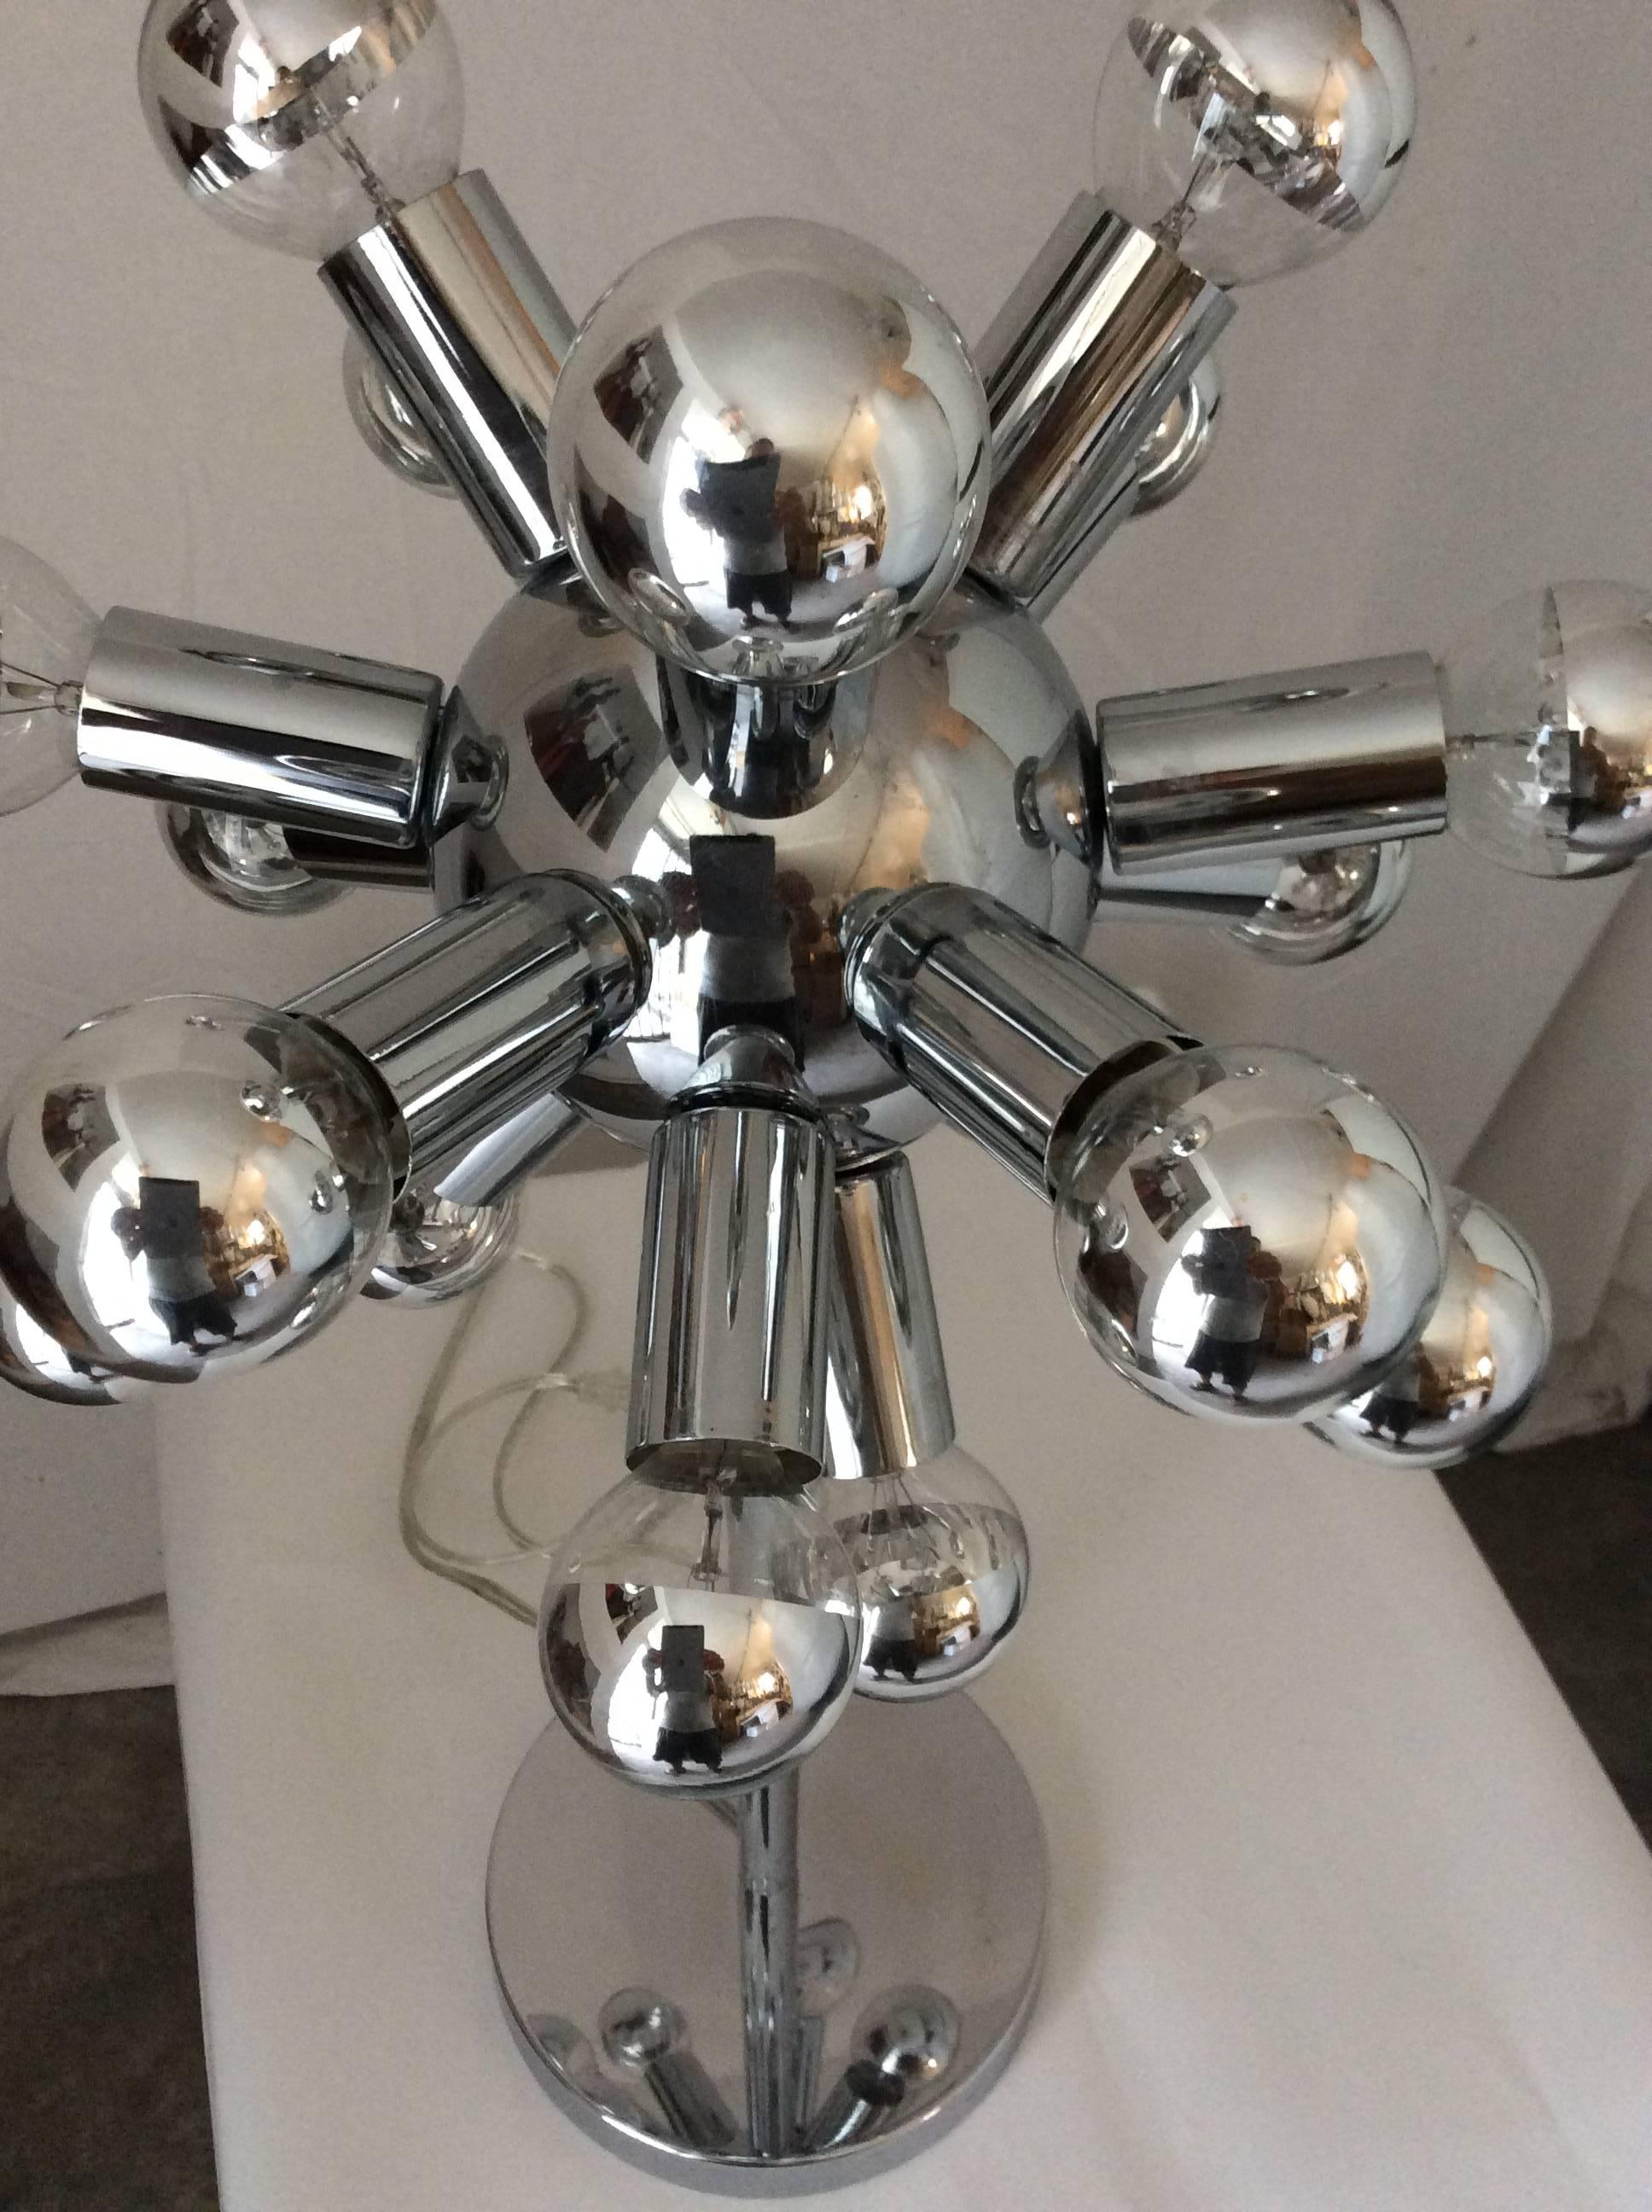 20th Century Pair of Mid-Century Modern American Chrome Sputnik Table Lamps, Torino Style For Sale